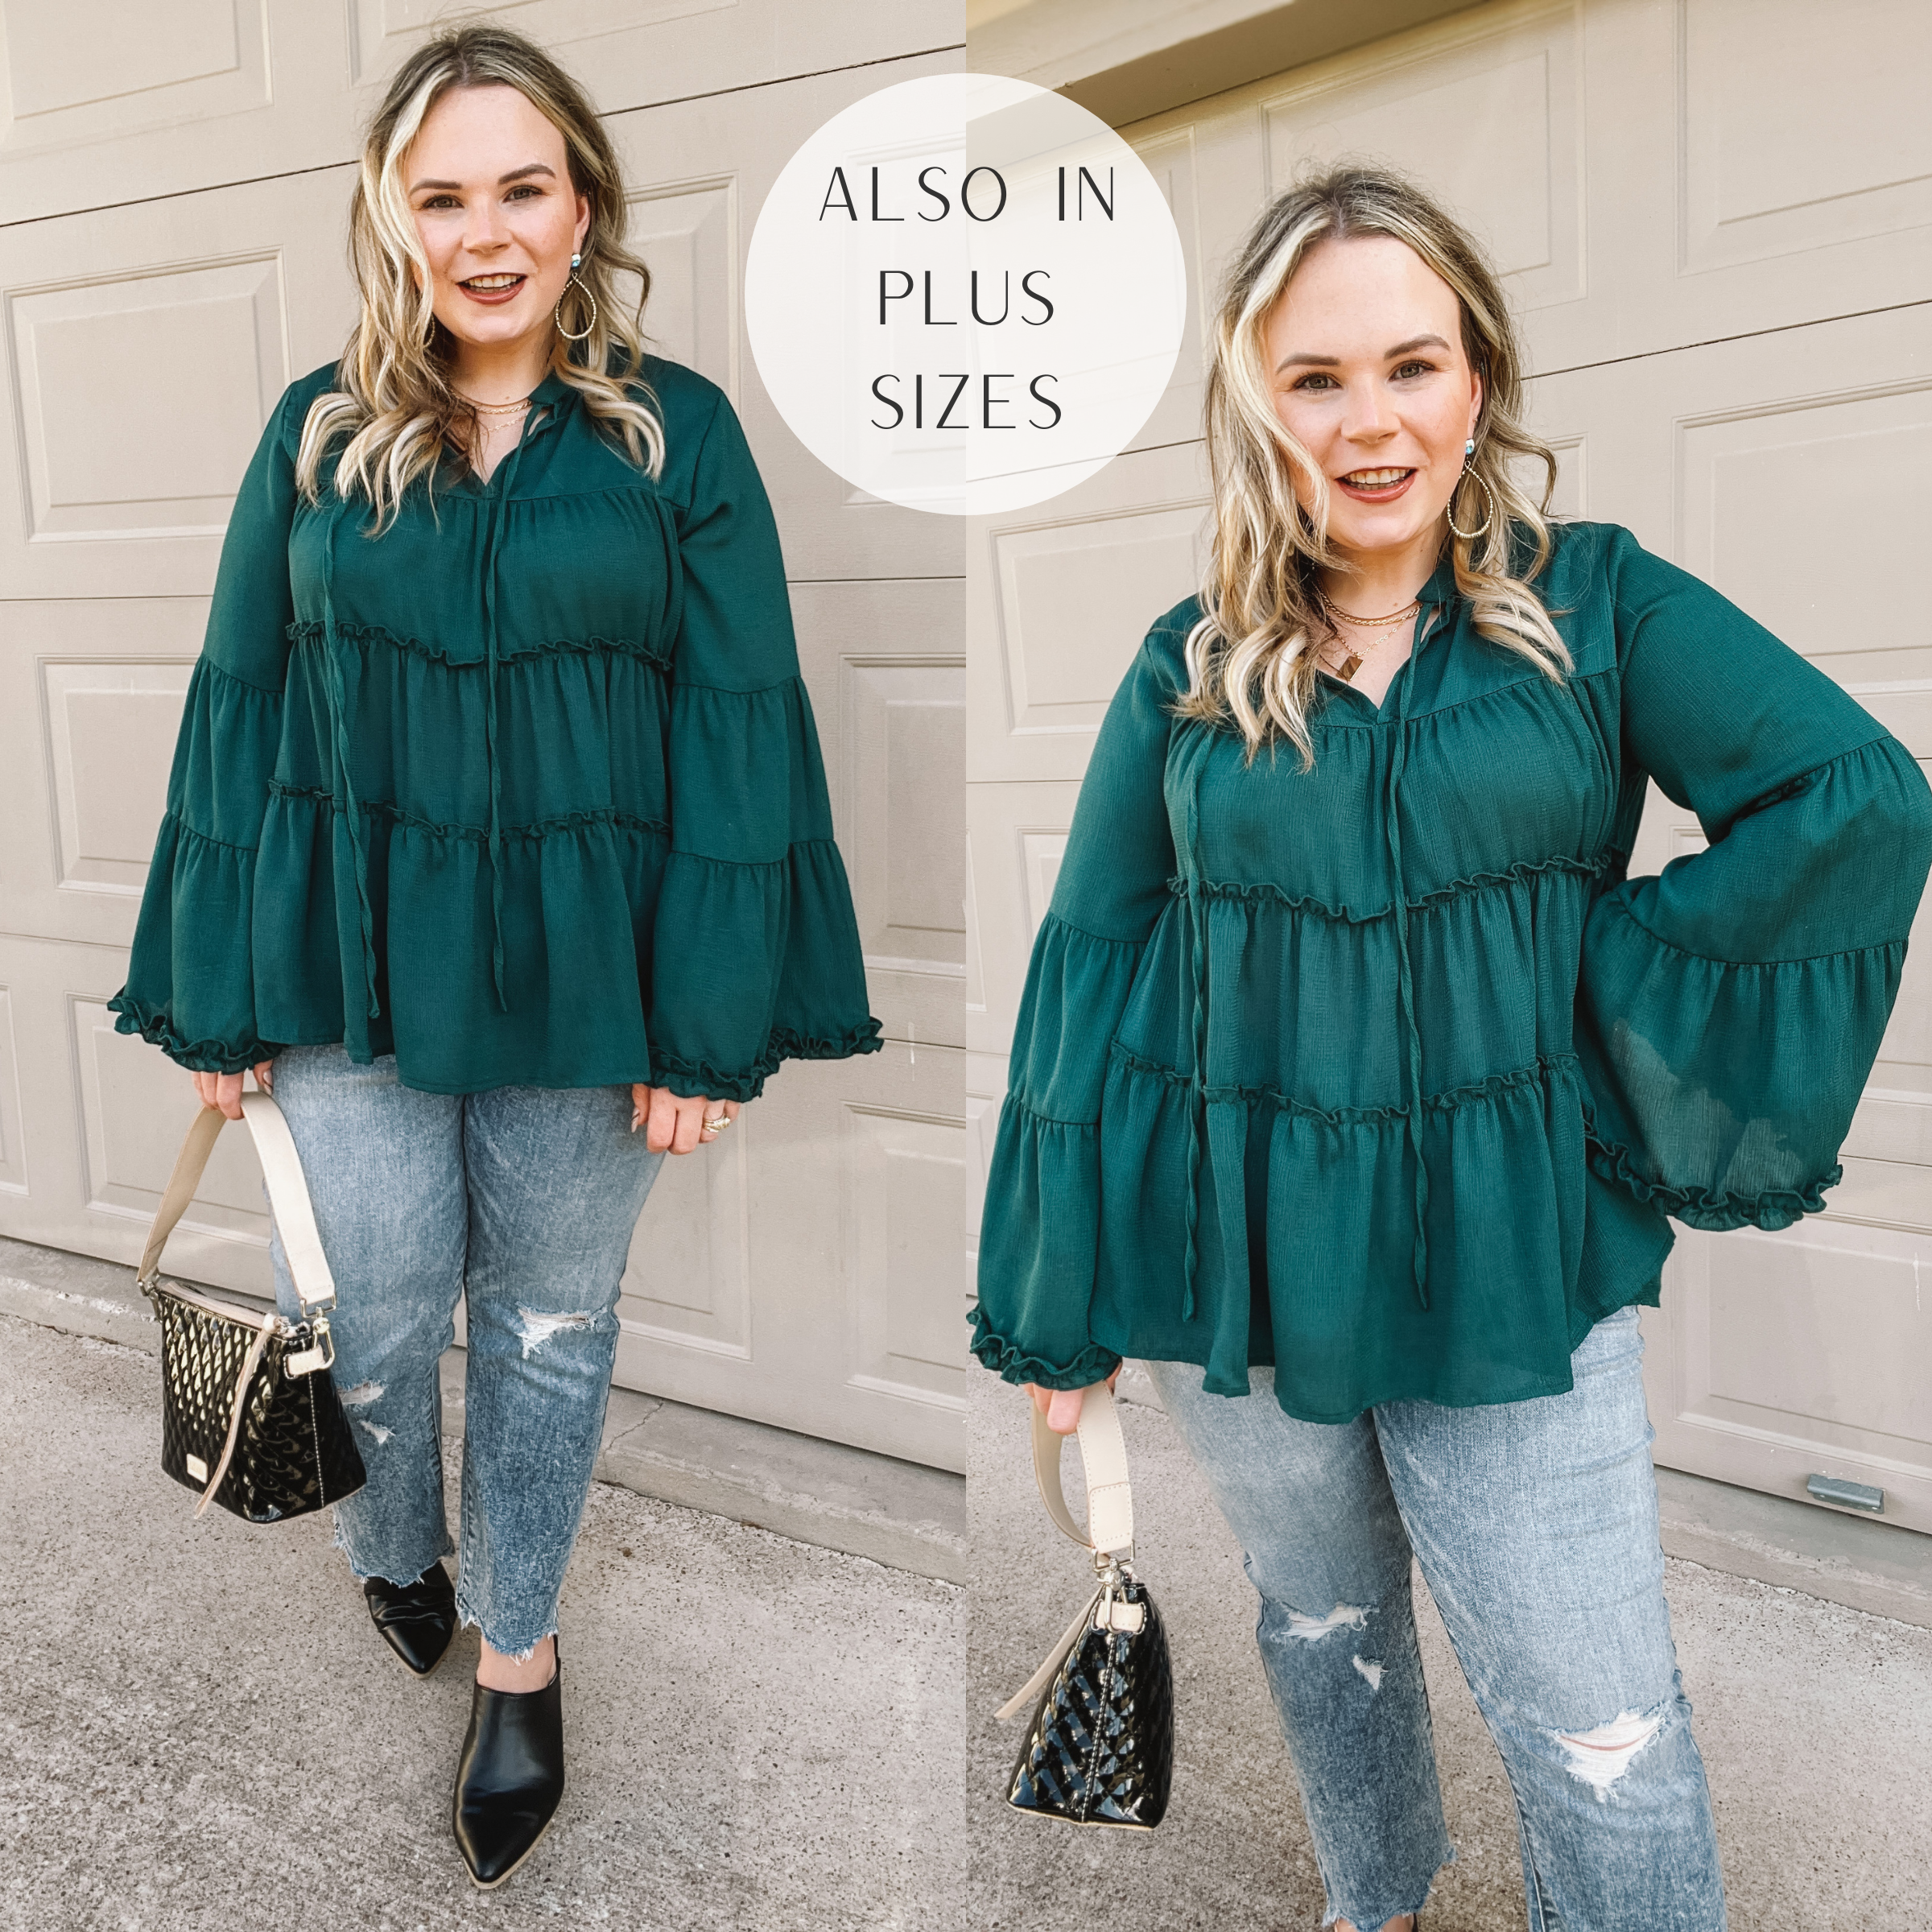 Impressive Touch Striped Bell Sleeve Tiered Blouse in Emerald Green - Giddy Up Glamour Boutique